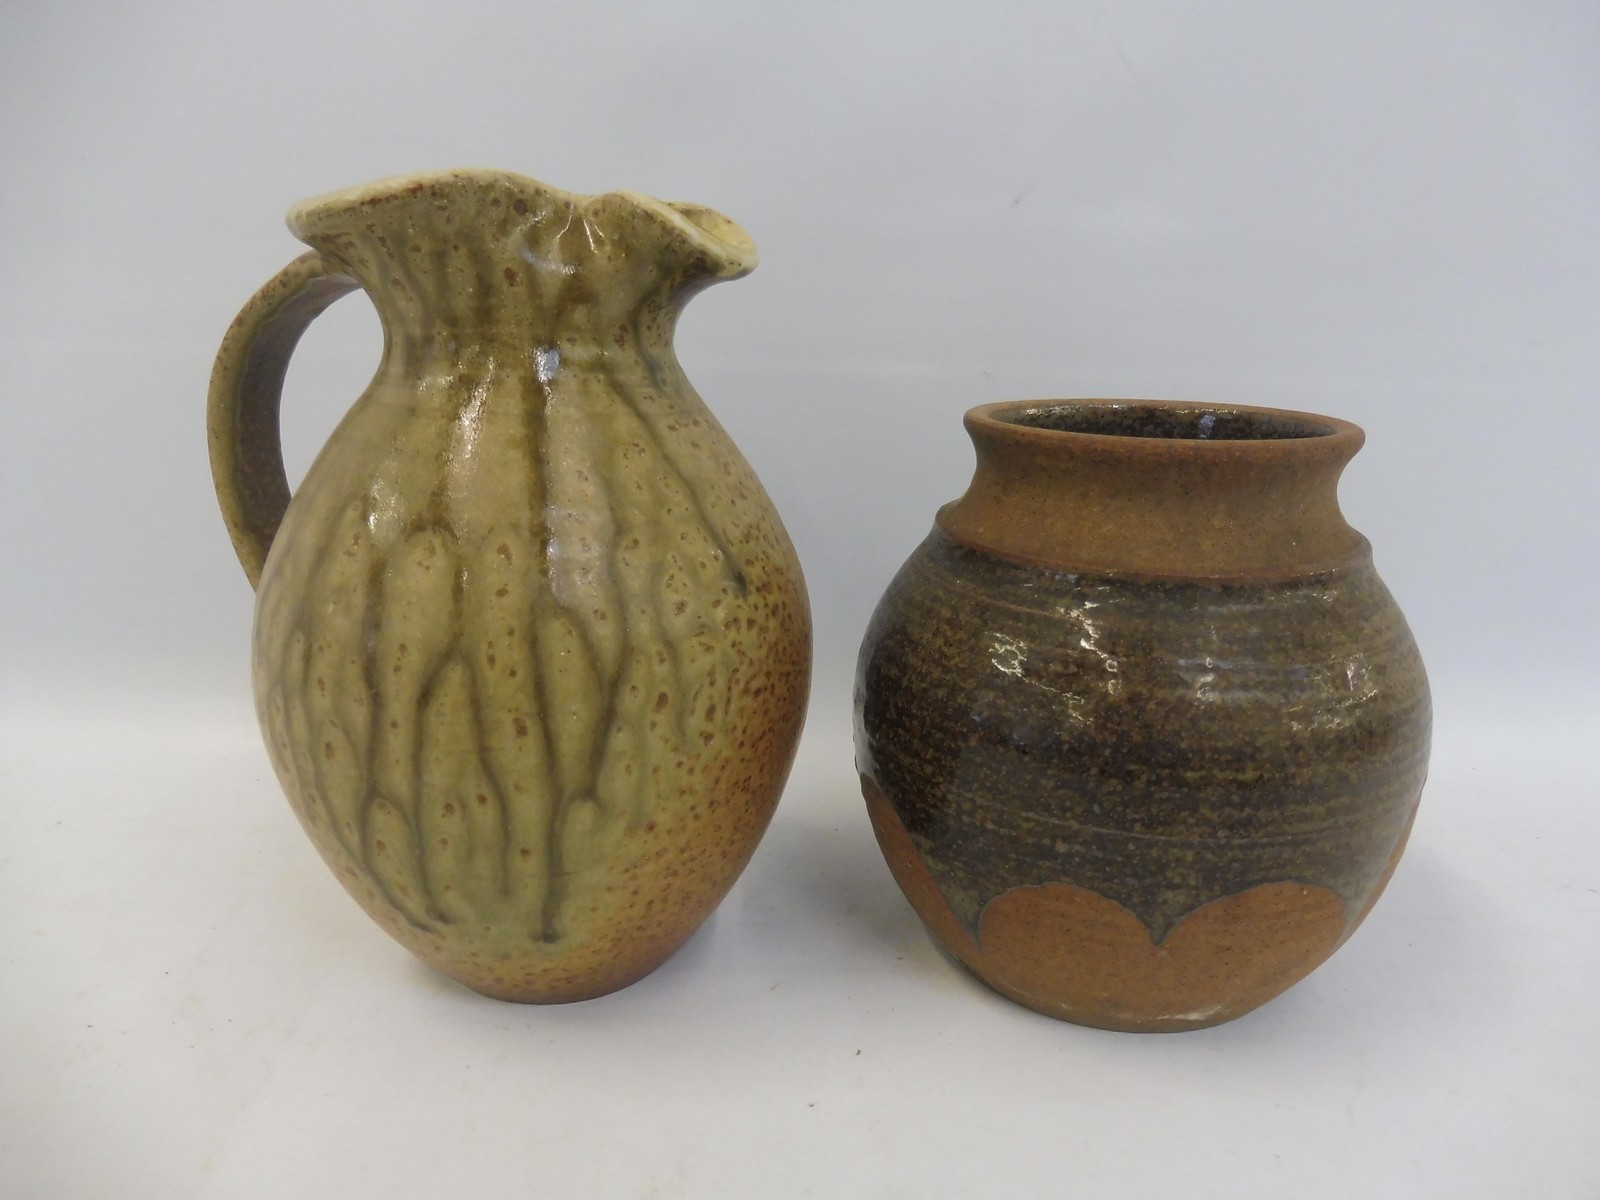 A Leach pottery vase, 5" high plus a Leach jug, 7" high, both with impressed marks. - Image 3 of 4